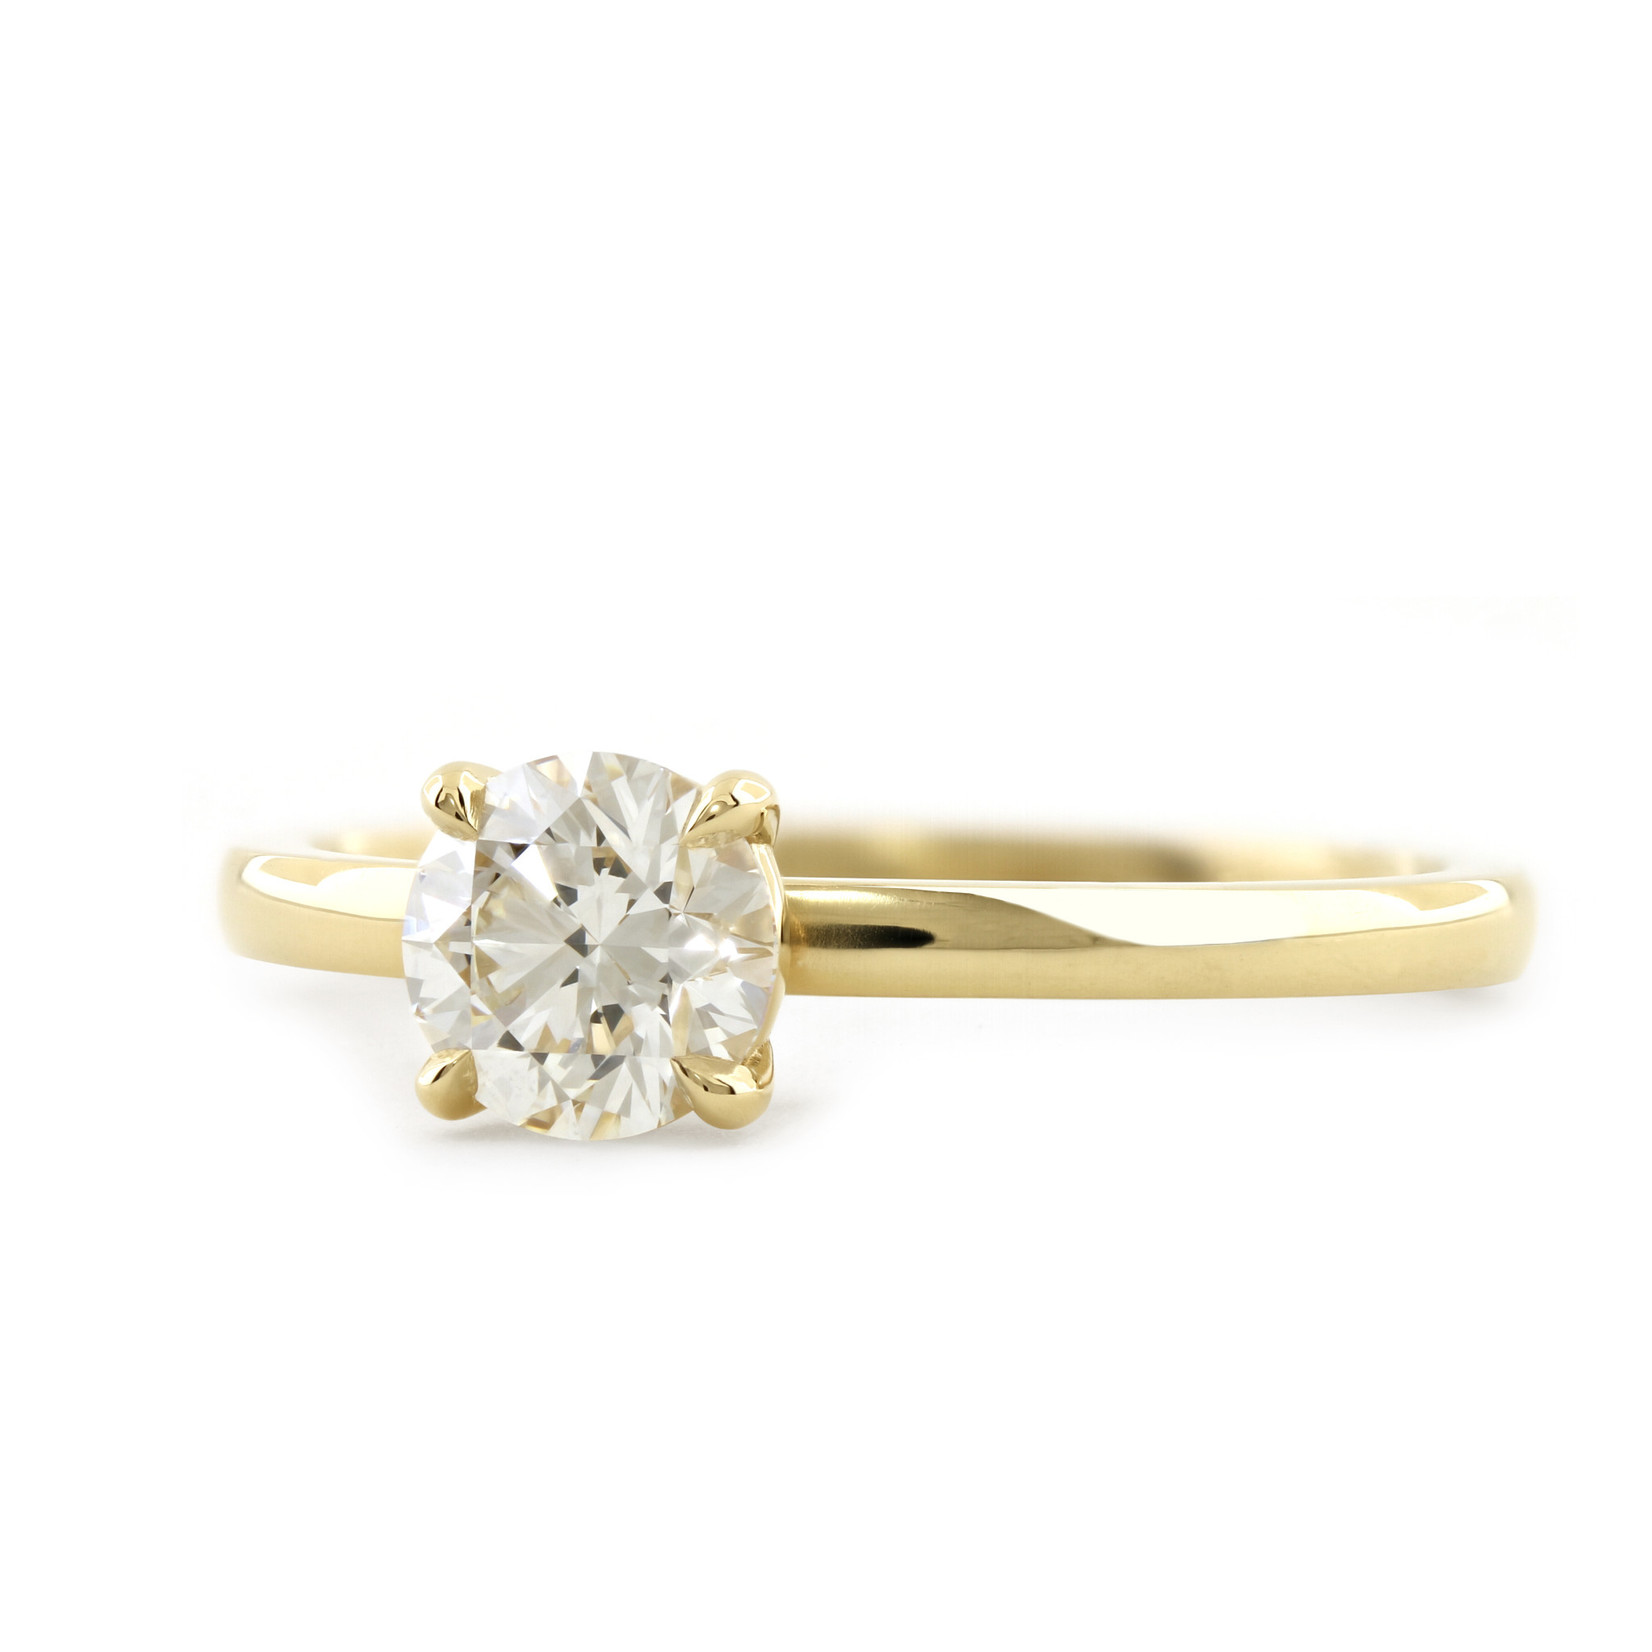 Baxter Moerman Chelsea Engagment Ring with Round Diamond